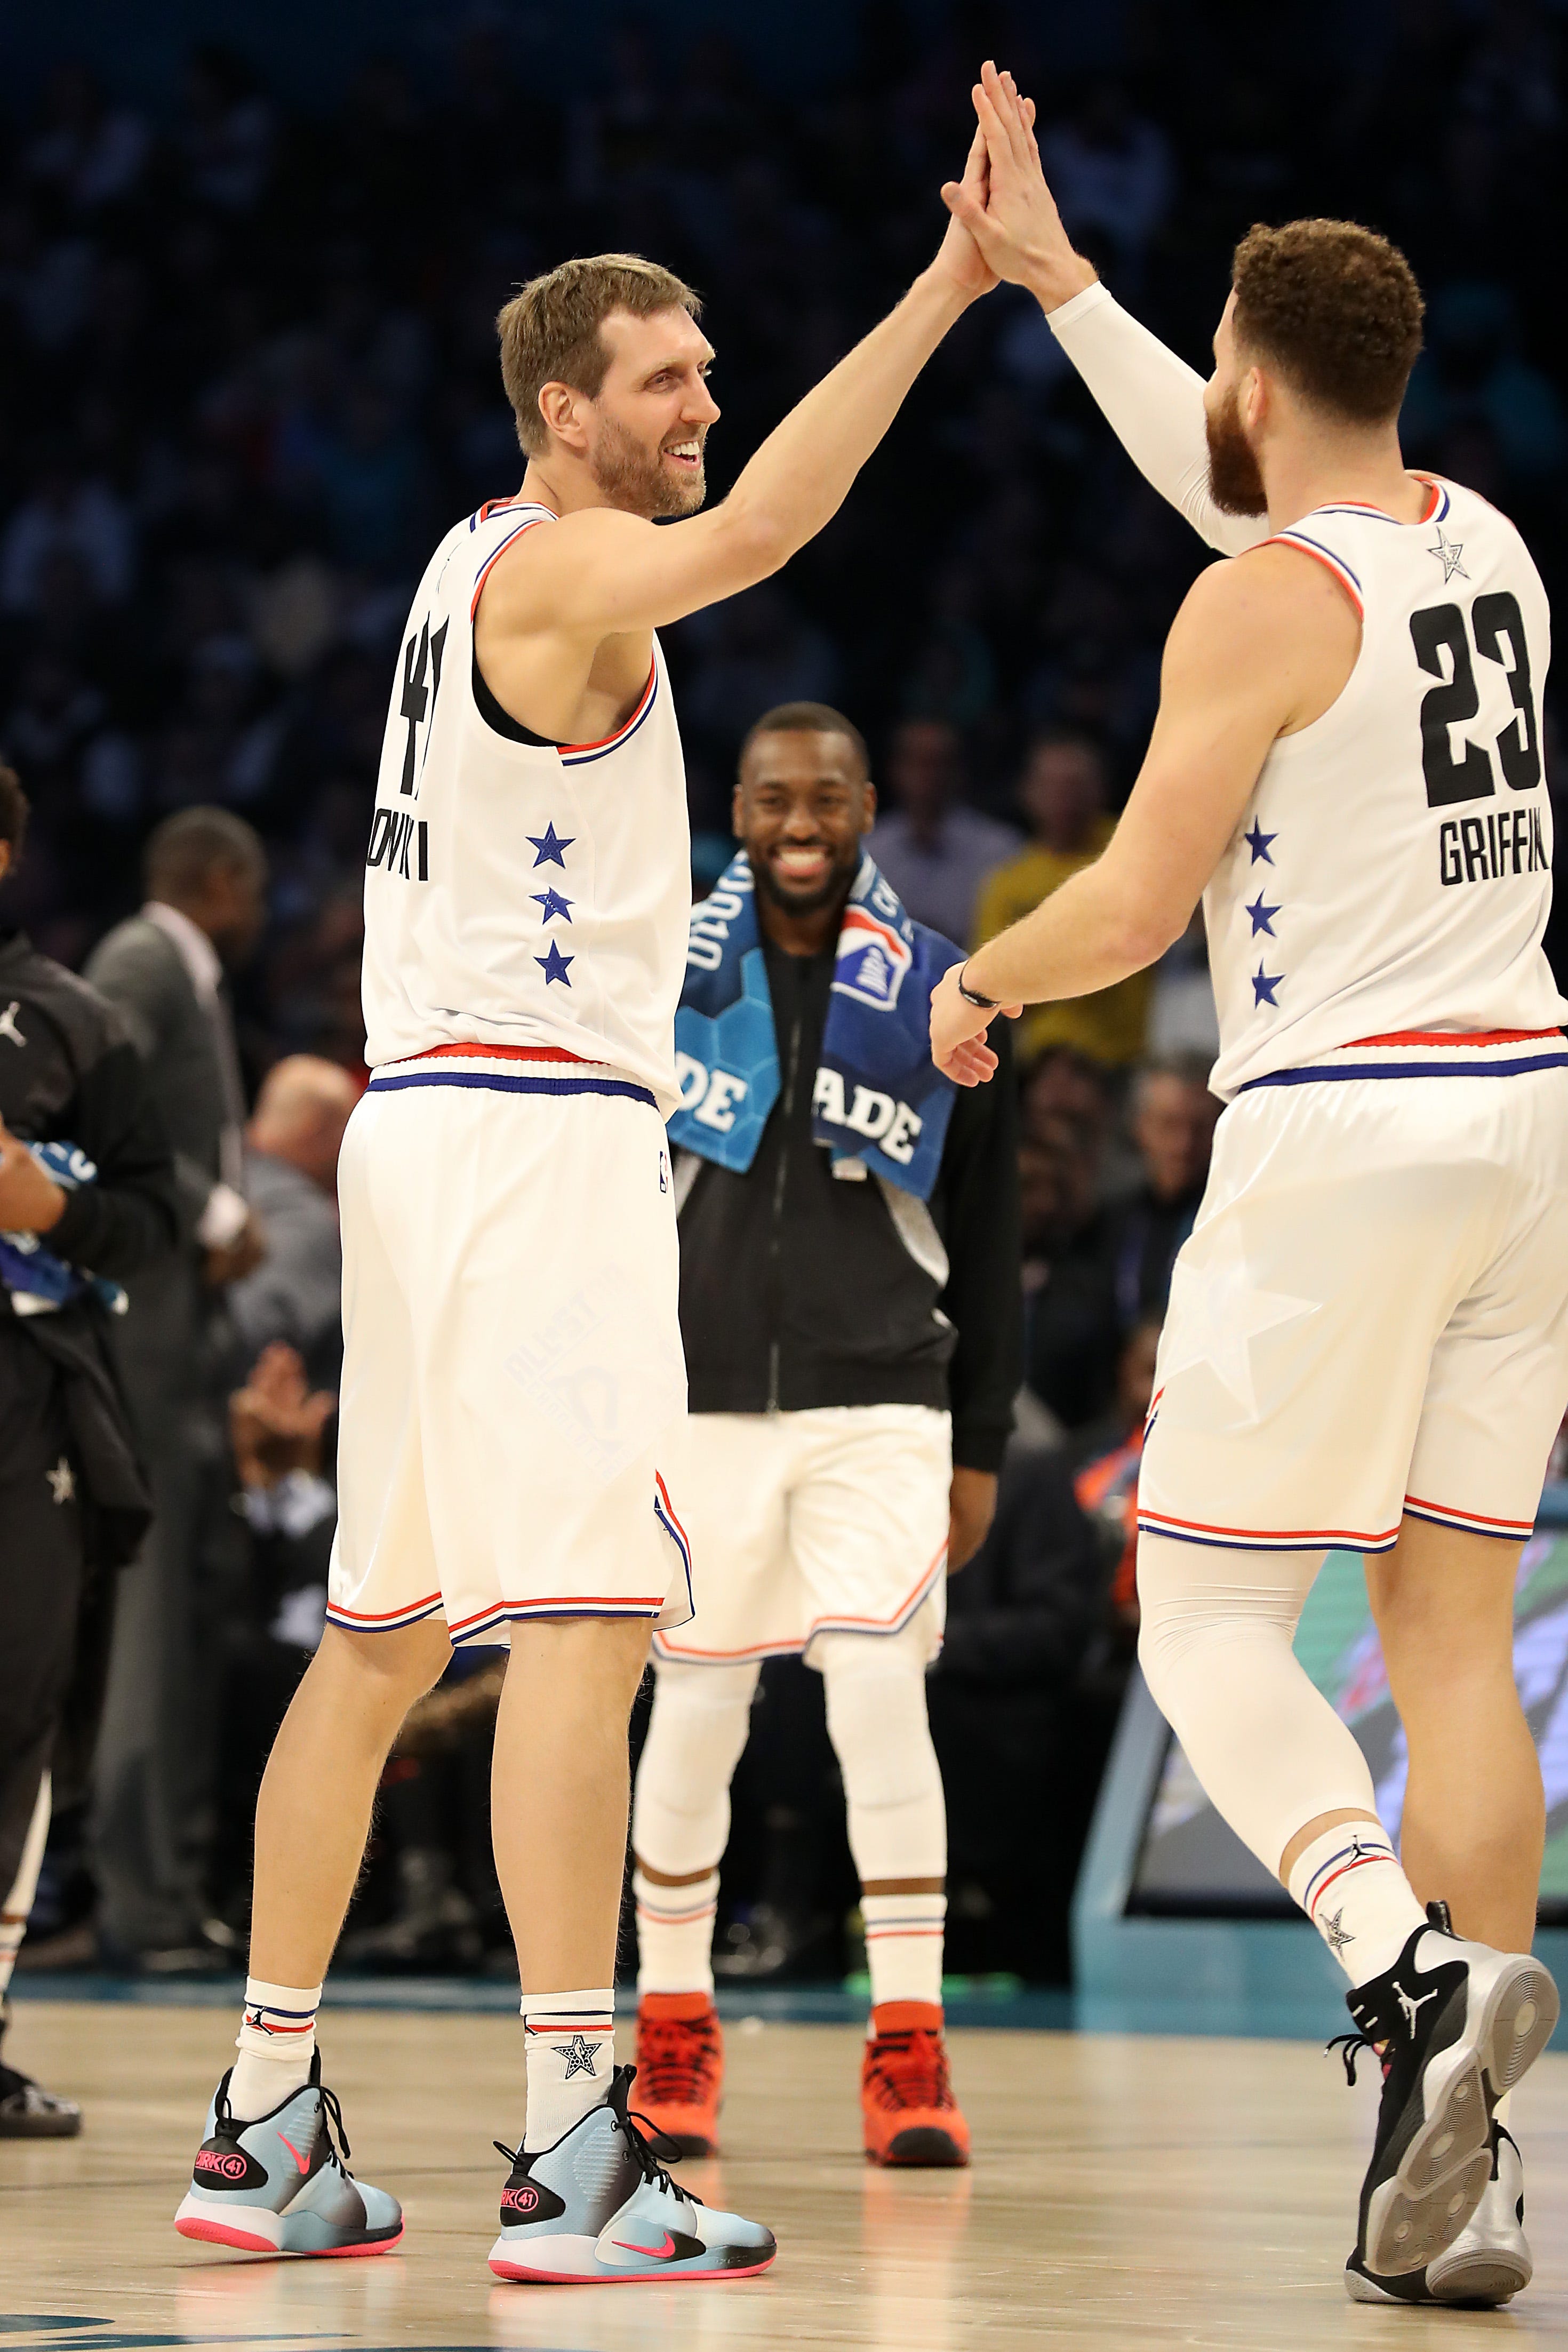 Dirk Nowitzki of the Dallas Mavericks and Team Giannis reacts with Blake Griffin of the Pistons against Team LeBron in the second quarter.